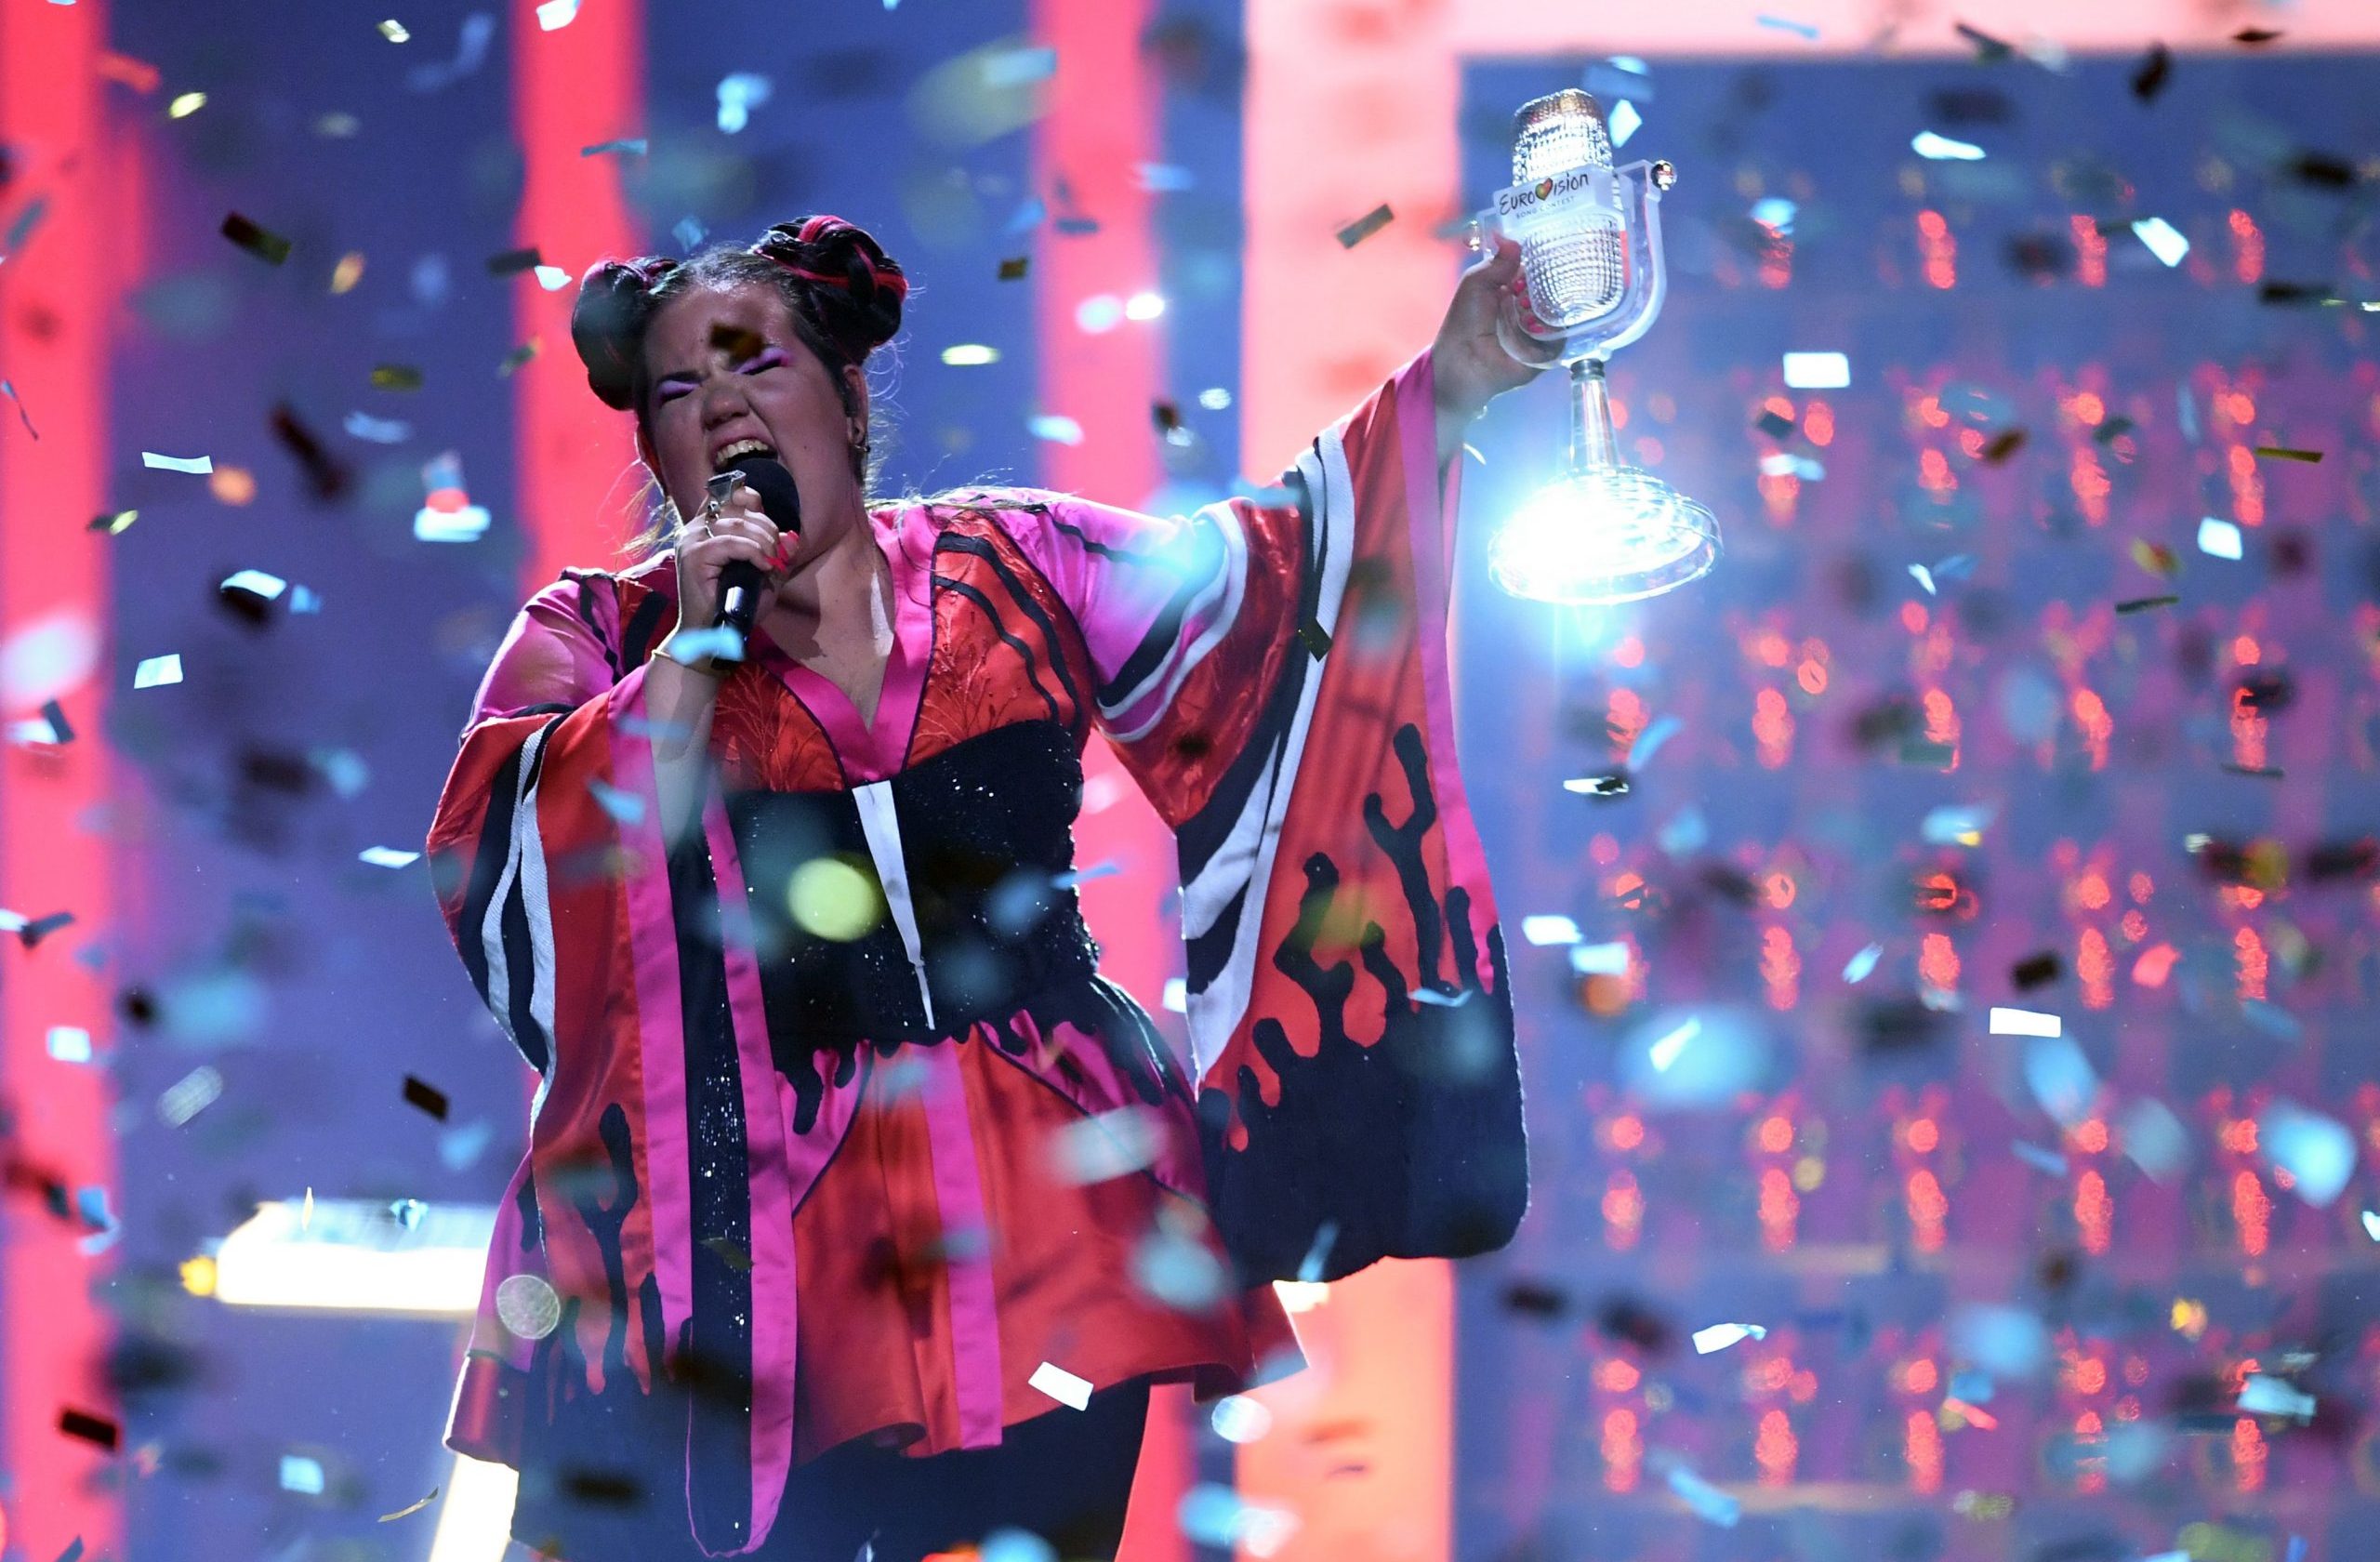 TOPSHOT - Israel's singer Netta Barzilai aka Netta performs with the trophy after winning the final of the 63rd edition of the Eurovision Song Contest 2018 at the Altice Arena in Lisbon, on May 12, 2018. (Photo by Francisco LEONG / AFP)        (Photo credit should read FRANCISCO LEONG/AFP/Getty Images)